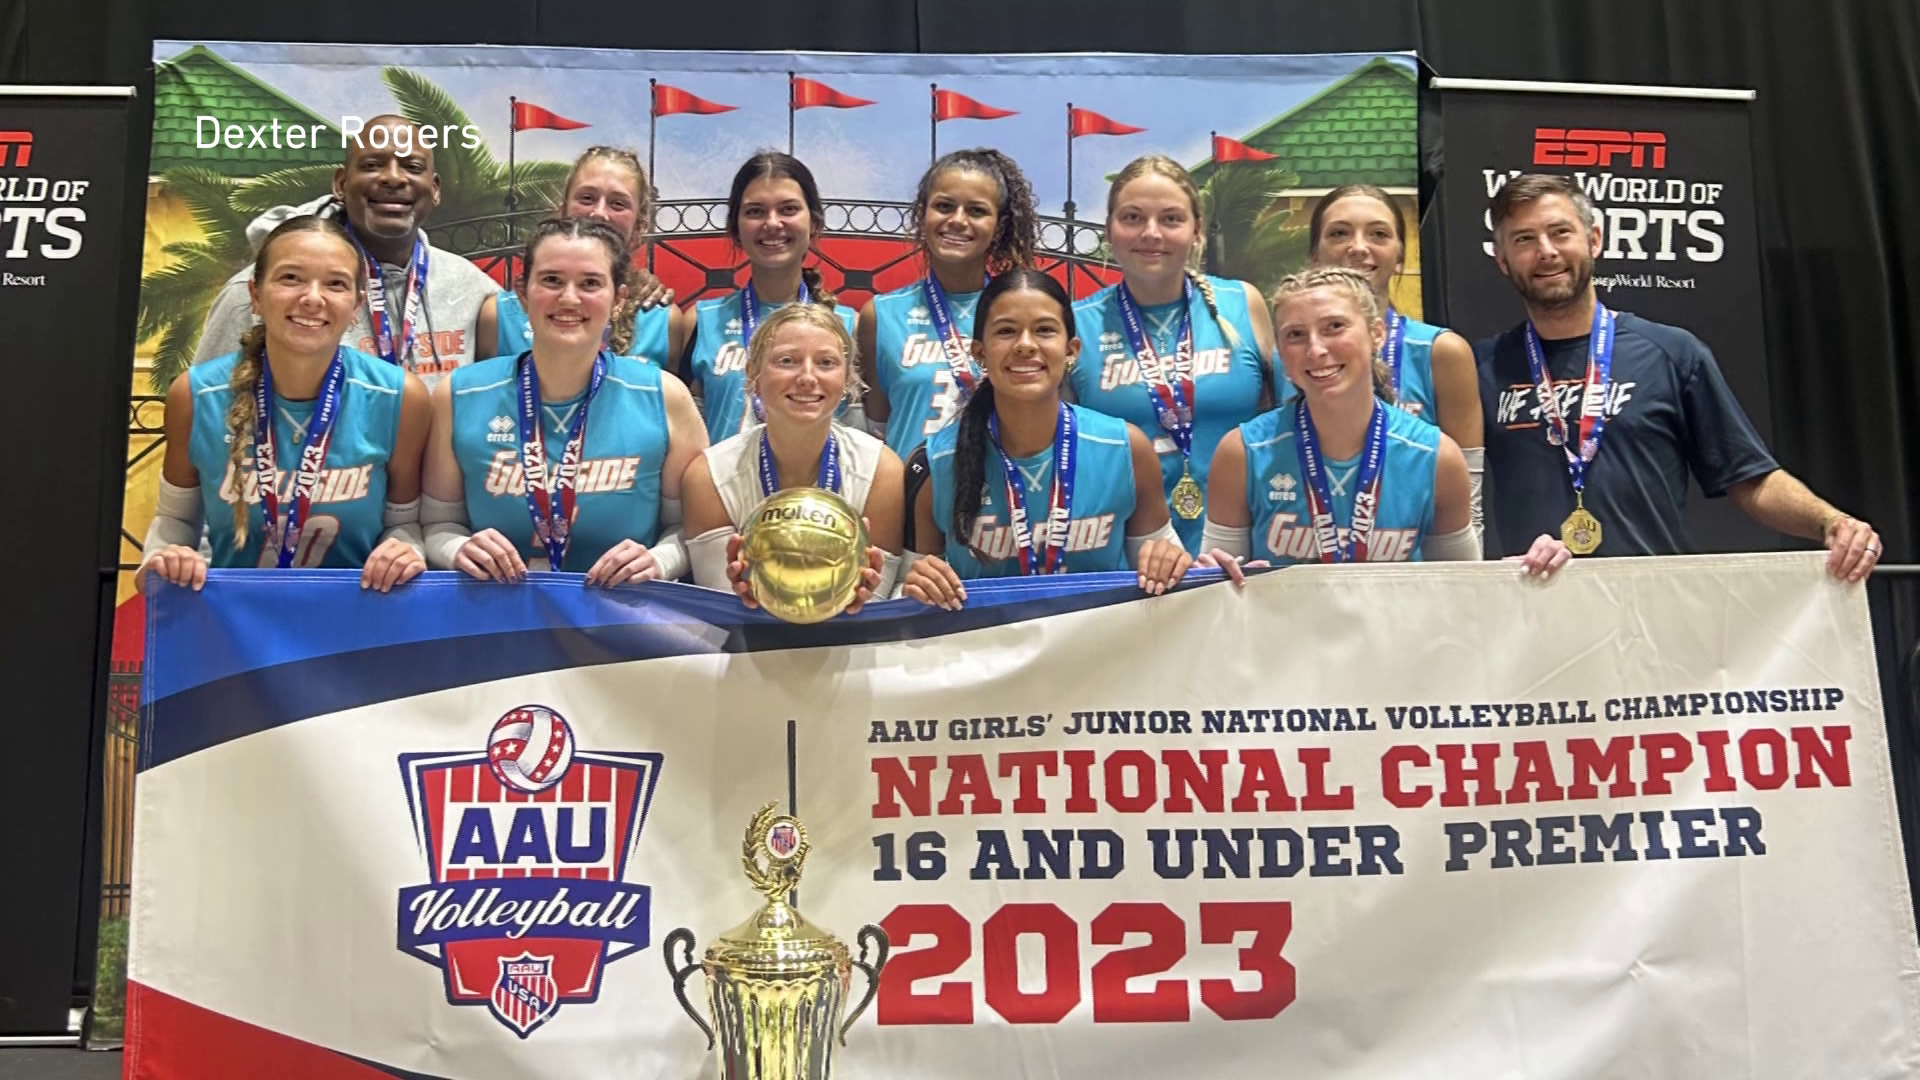 Naples volleyball team wins AAU Junior National Championship